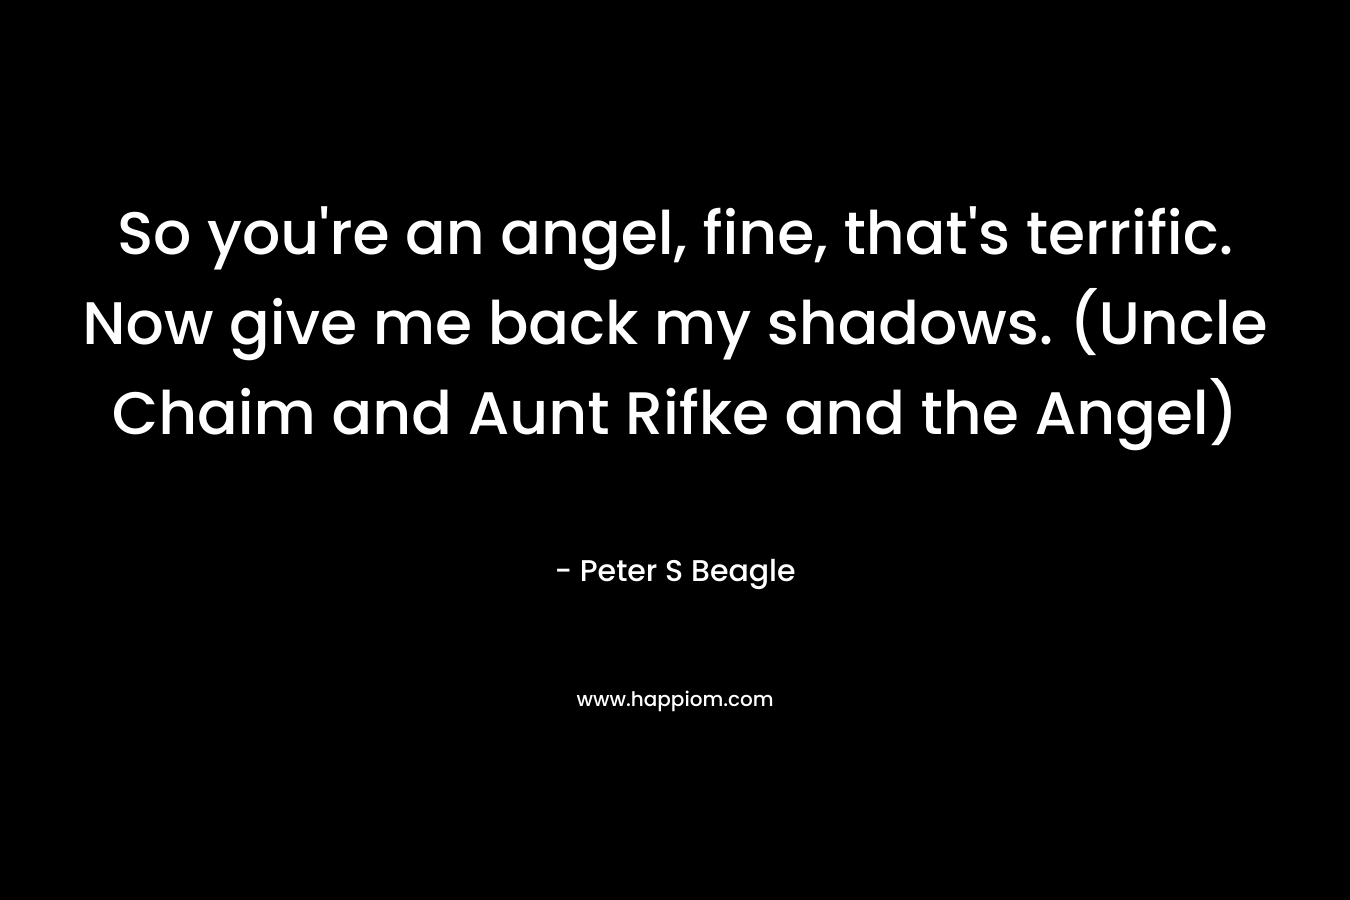 So you're an angel, fine, that's terrific. Now give me back my shadows. (Uncle Chaim and Aunt Rifke and the Angel)